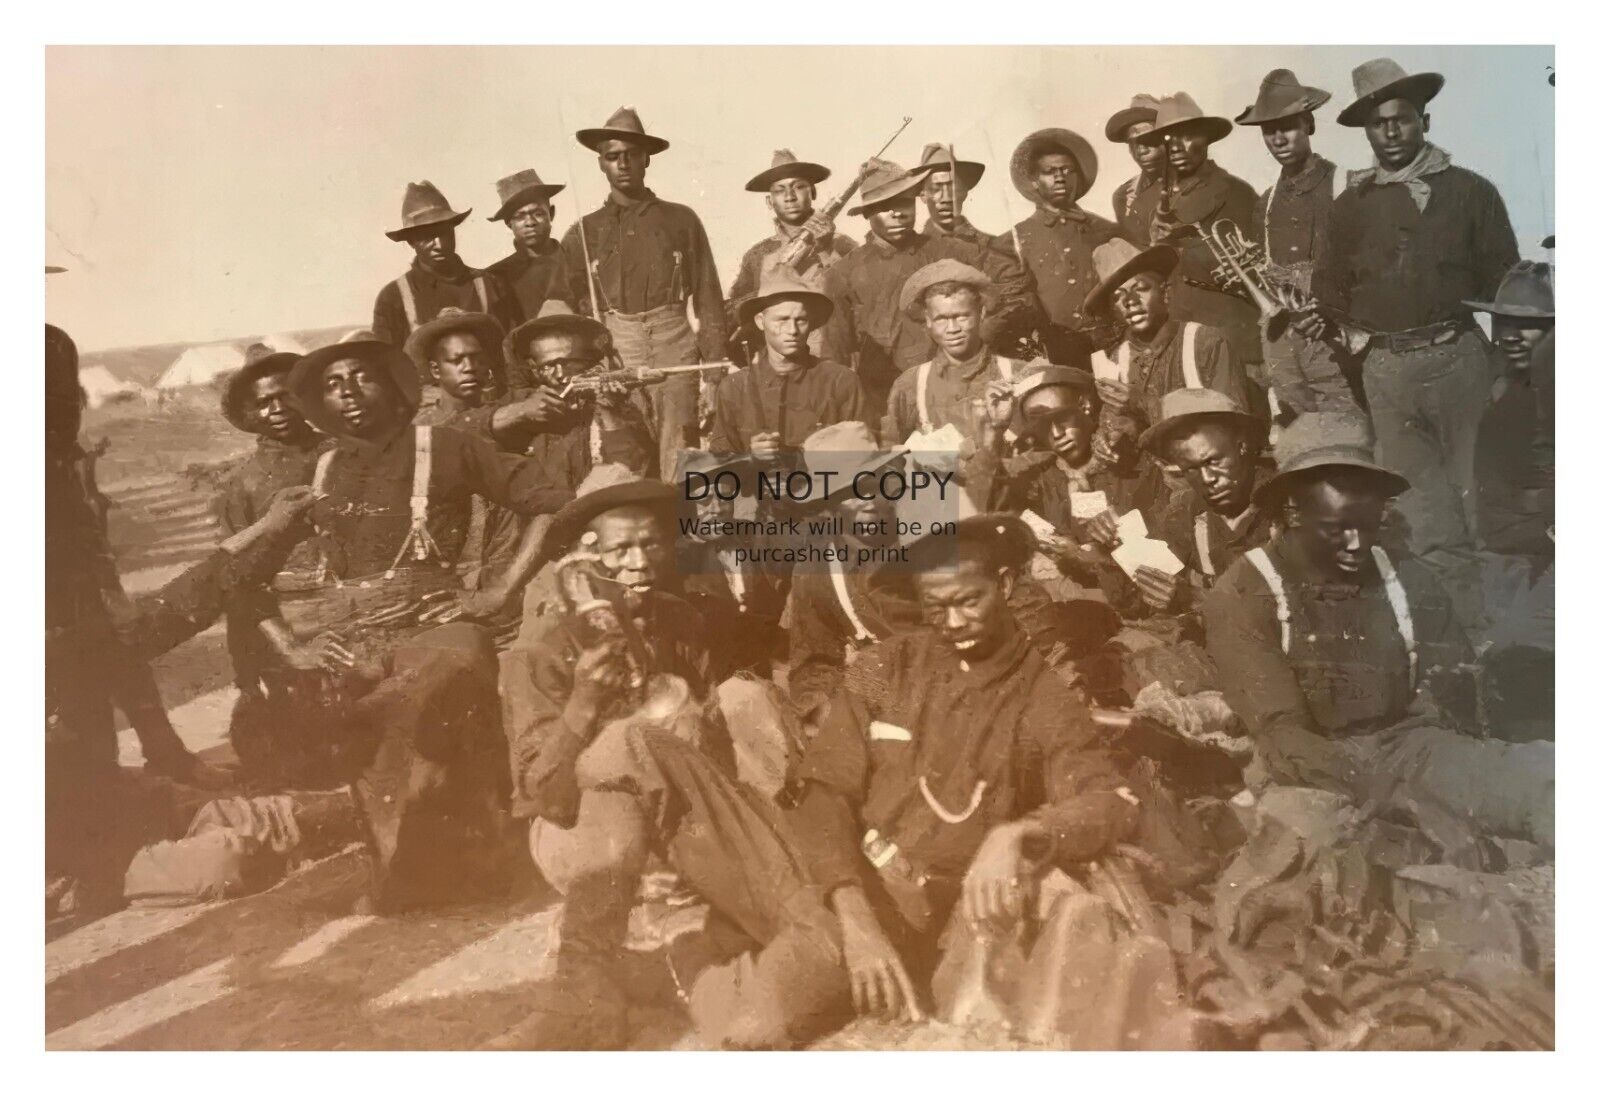 BUFFALO AFRICAN AMERICAN SOLDIERS AMERICAN FRONTIER HISTORICAL 4X6 PHOTO